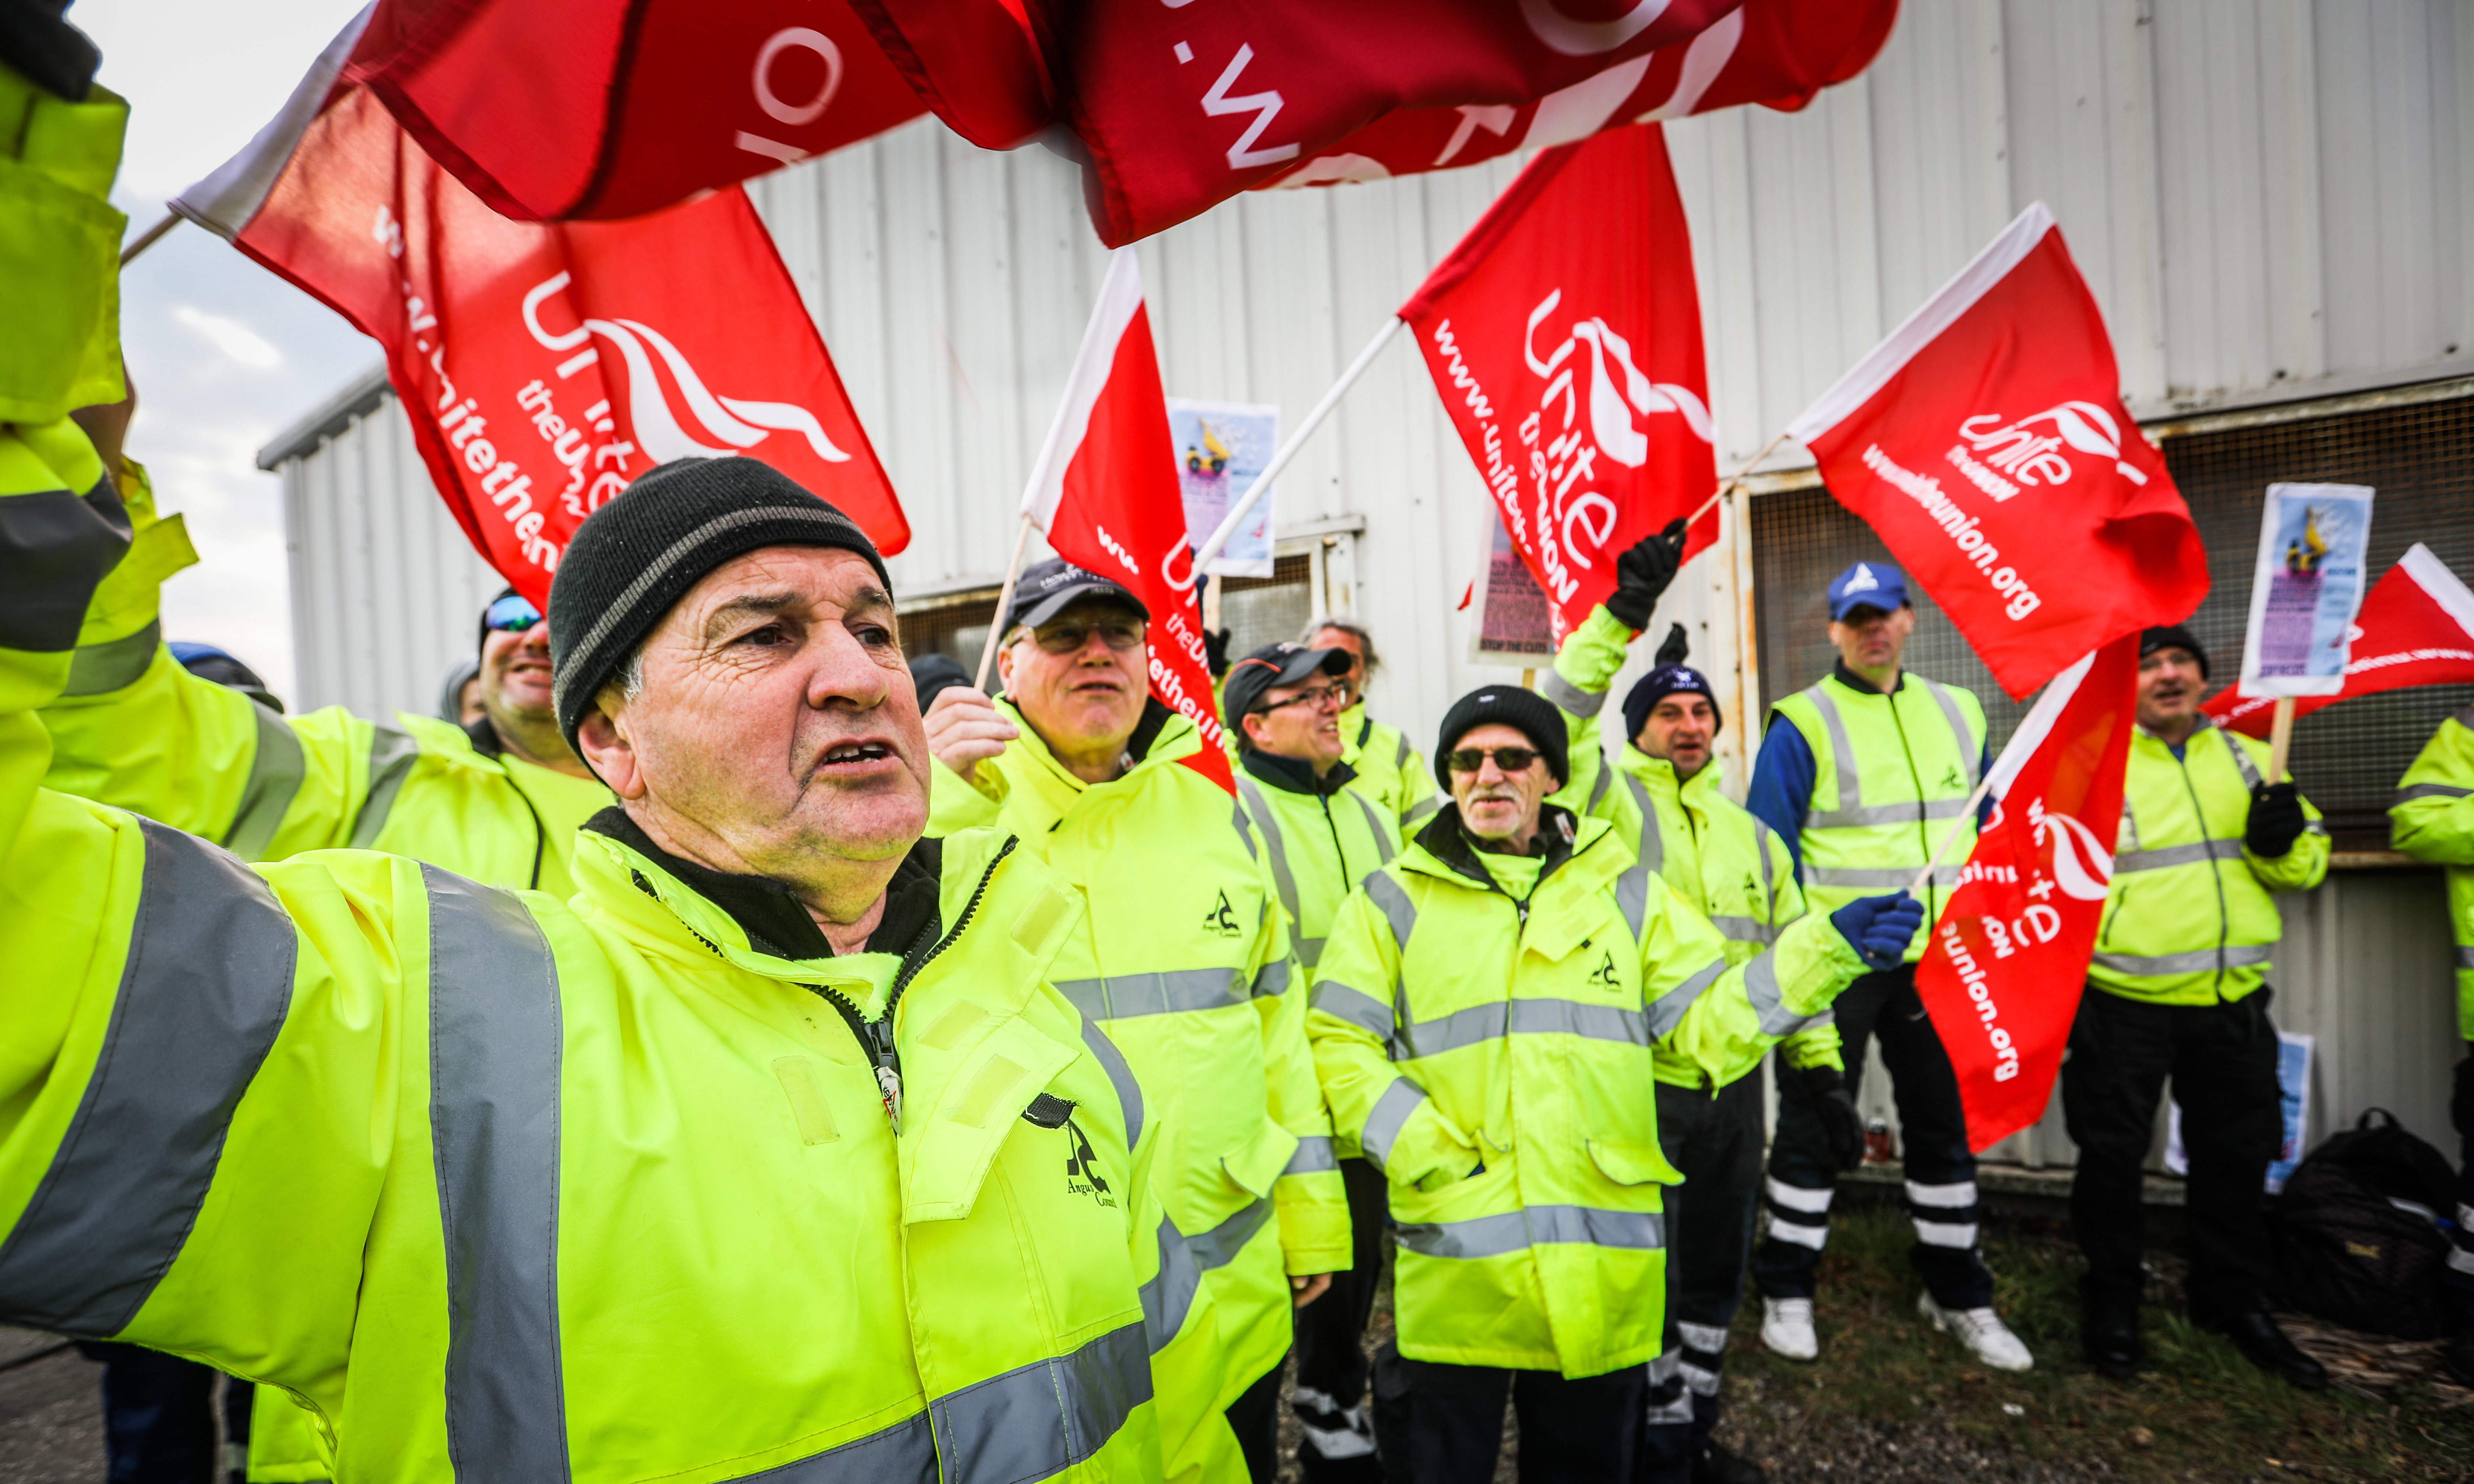 A picket line outside the recycling centre in Forfar during the bin strike.